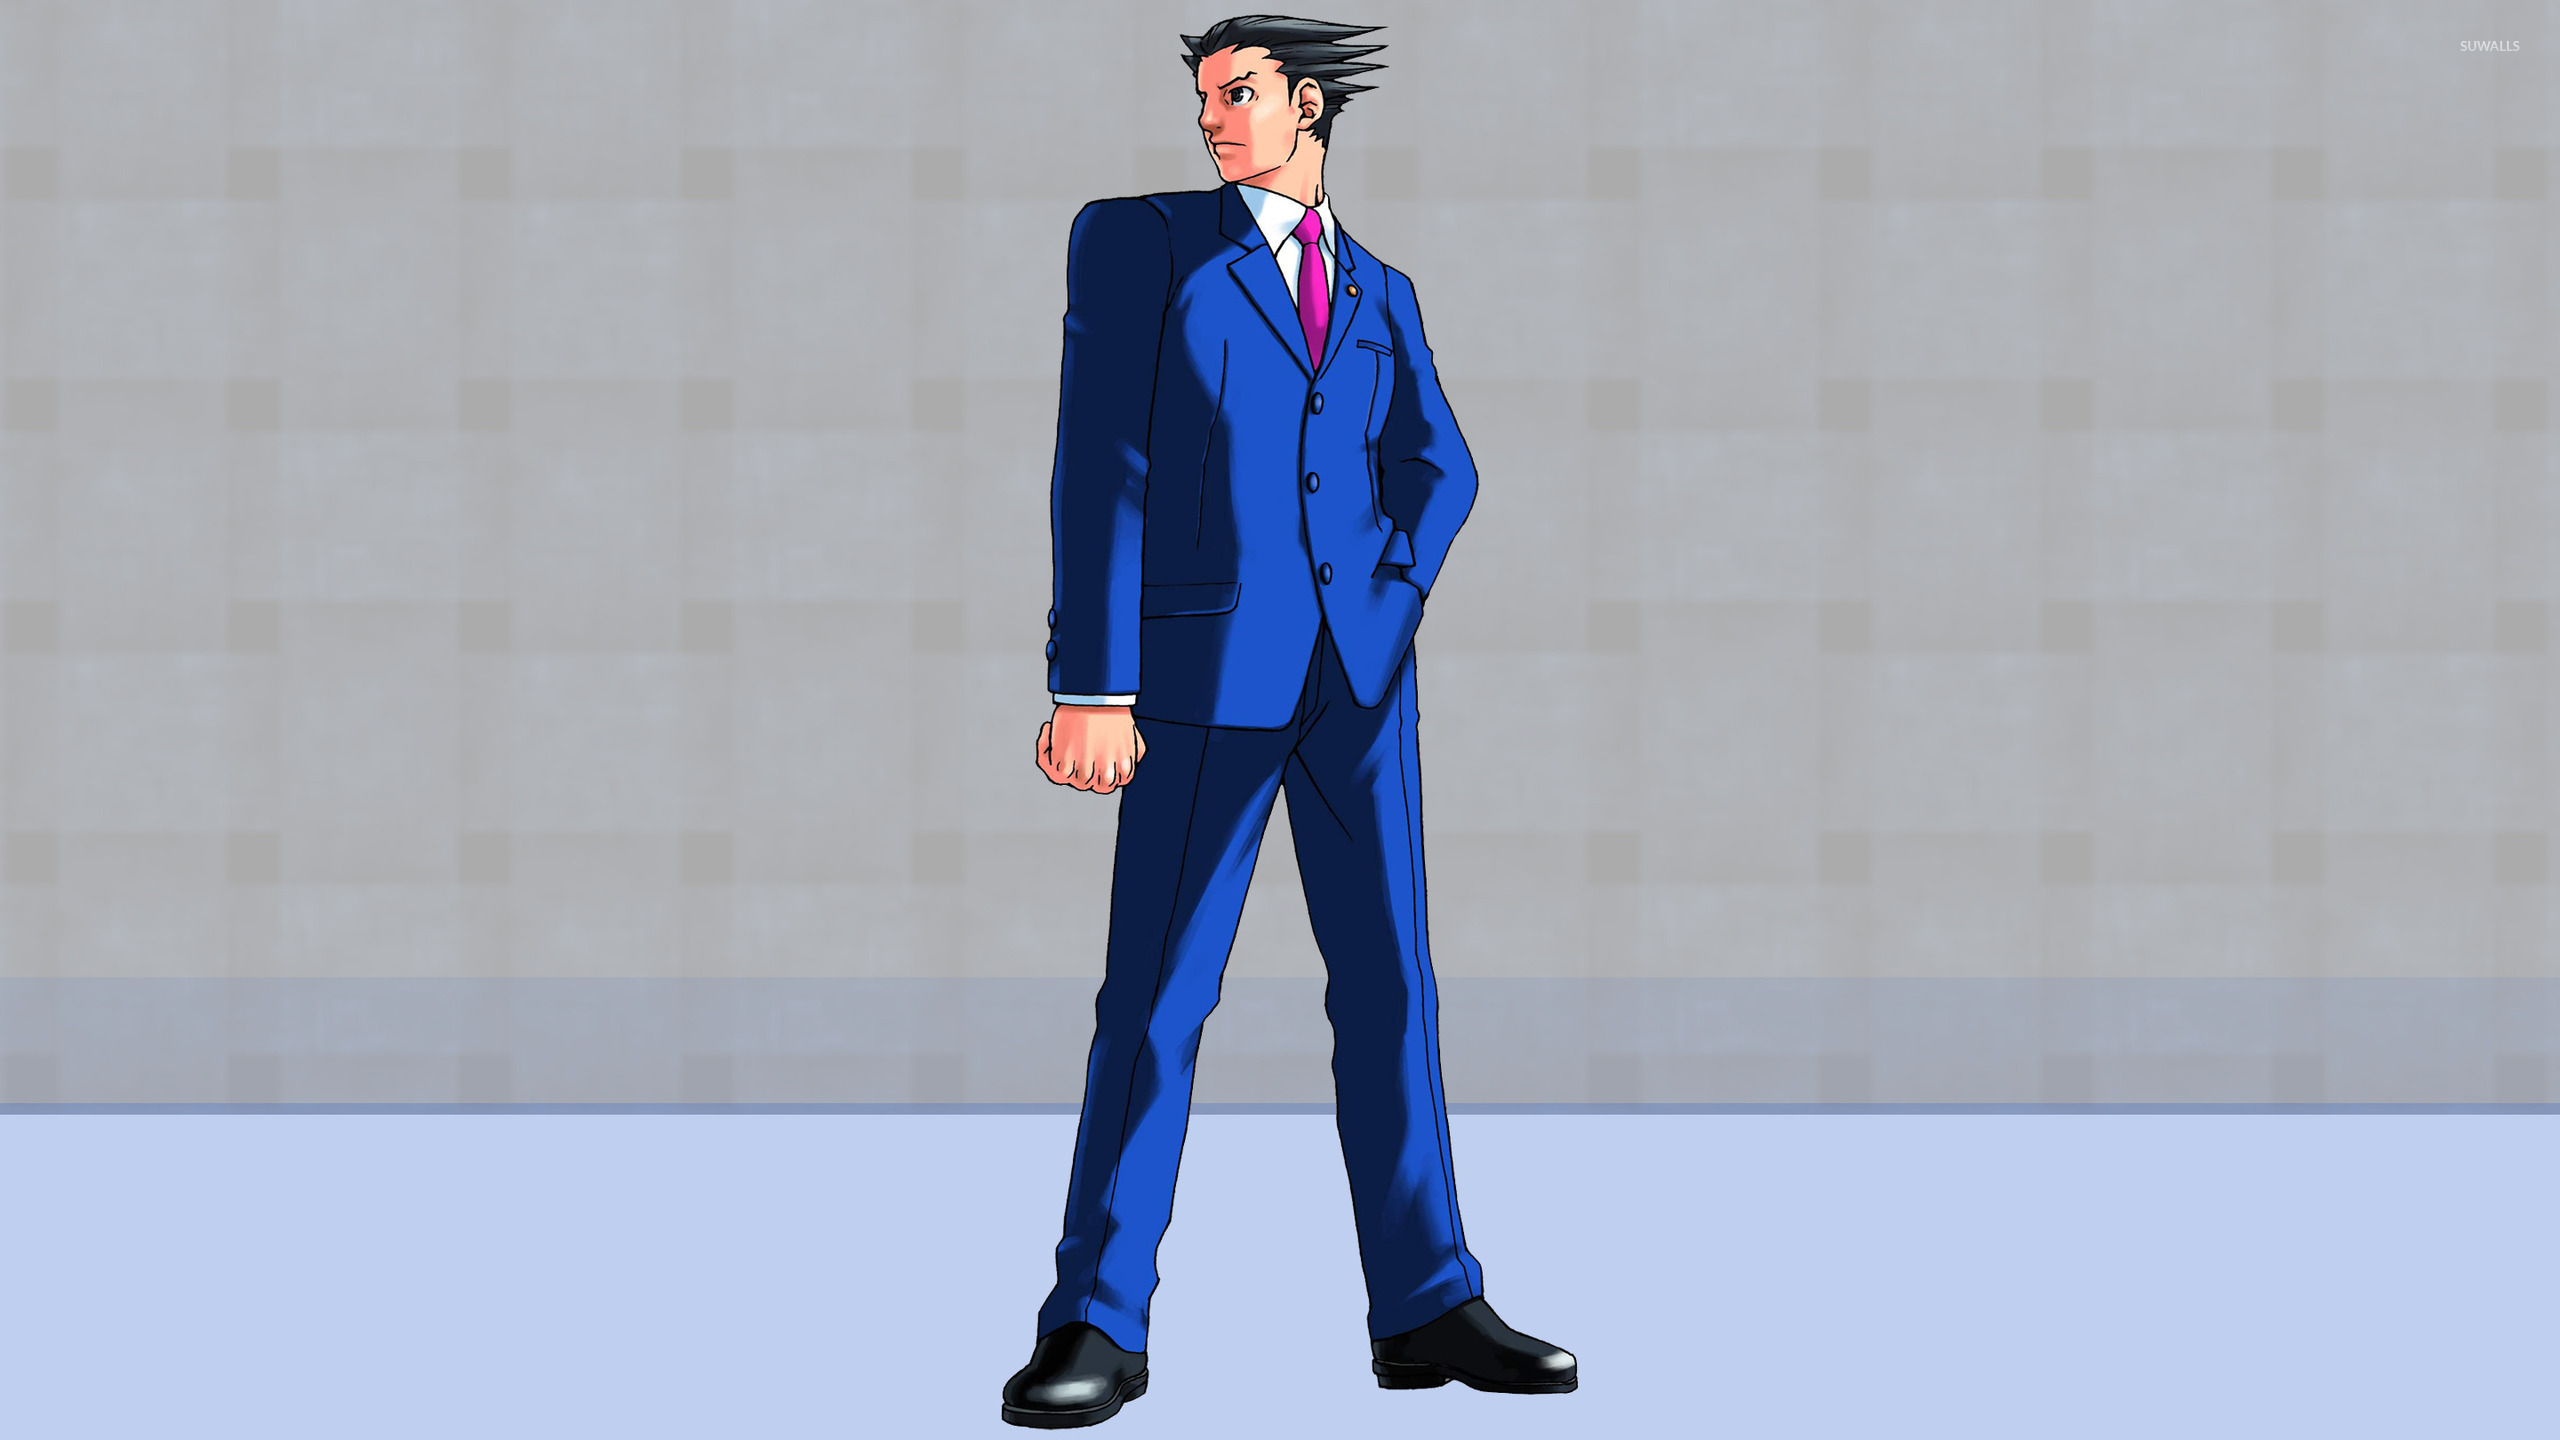 Phoenix Wright Ace Attorney [3] wallpaper   Game